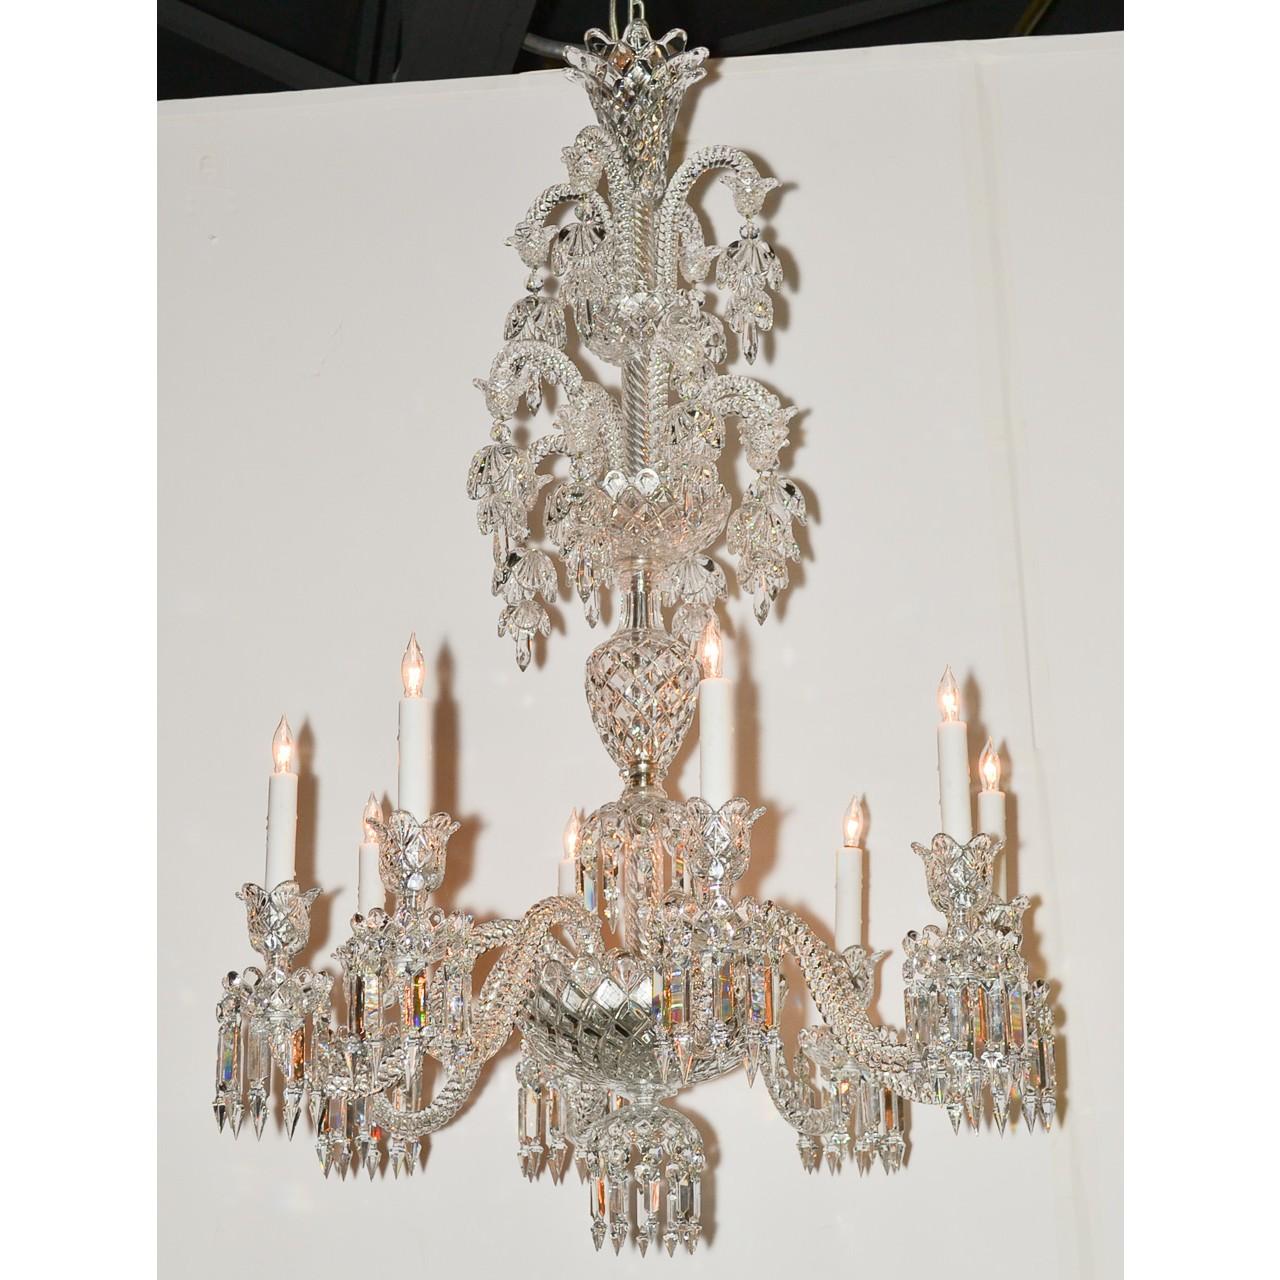 Carved Signed Baccarat Cut Crystal Chandelier, circa 1900